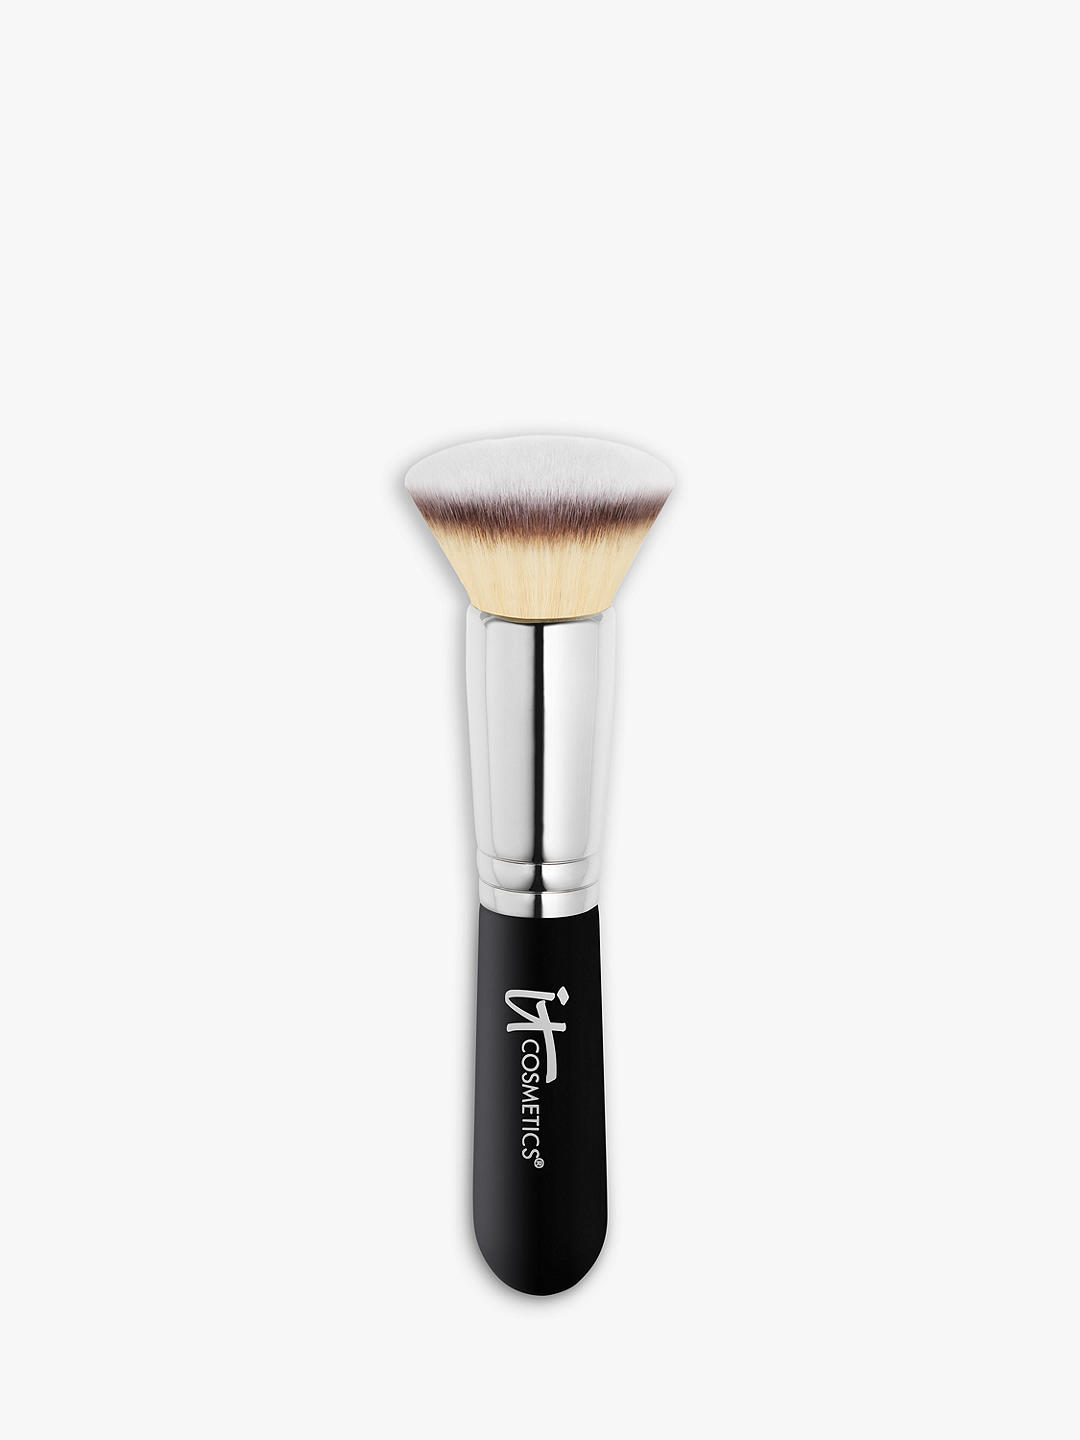 IT Cosmetics Heavenly Luxe Flat Top Buffing Foundation Brush #6 1